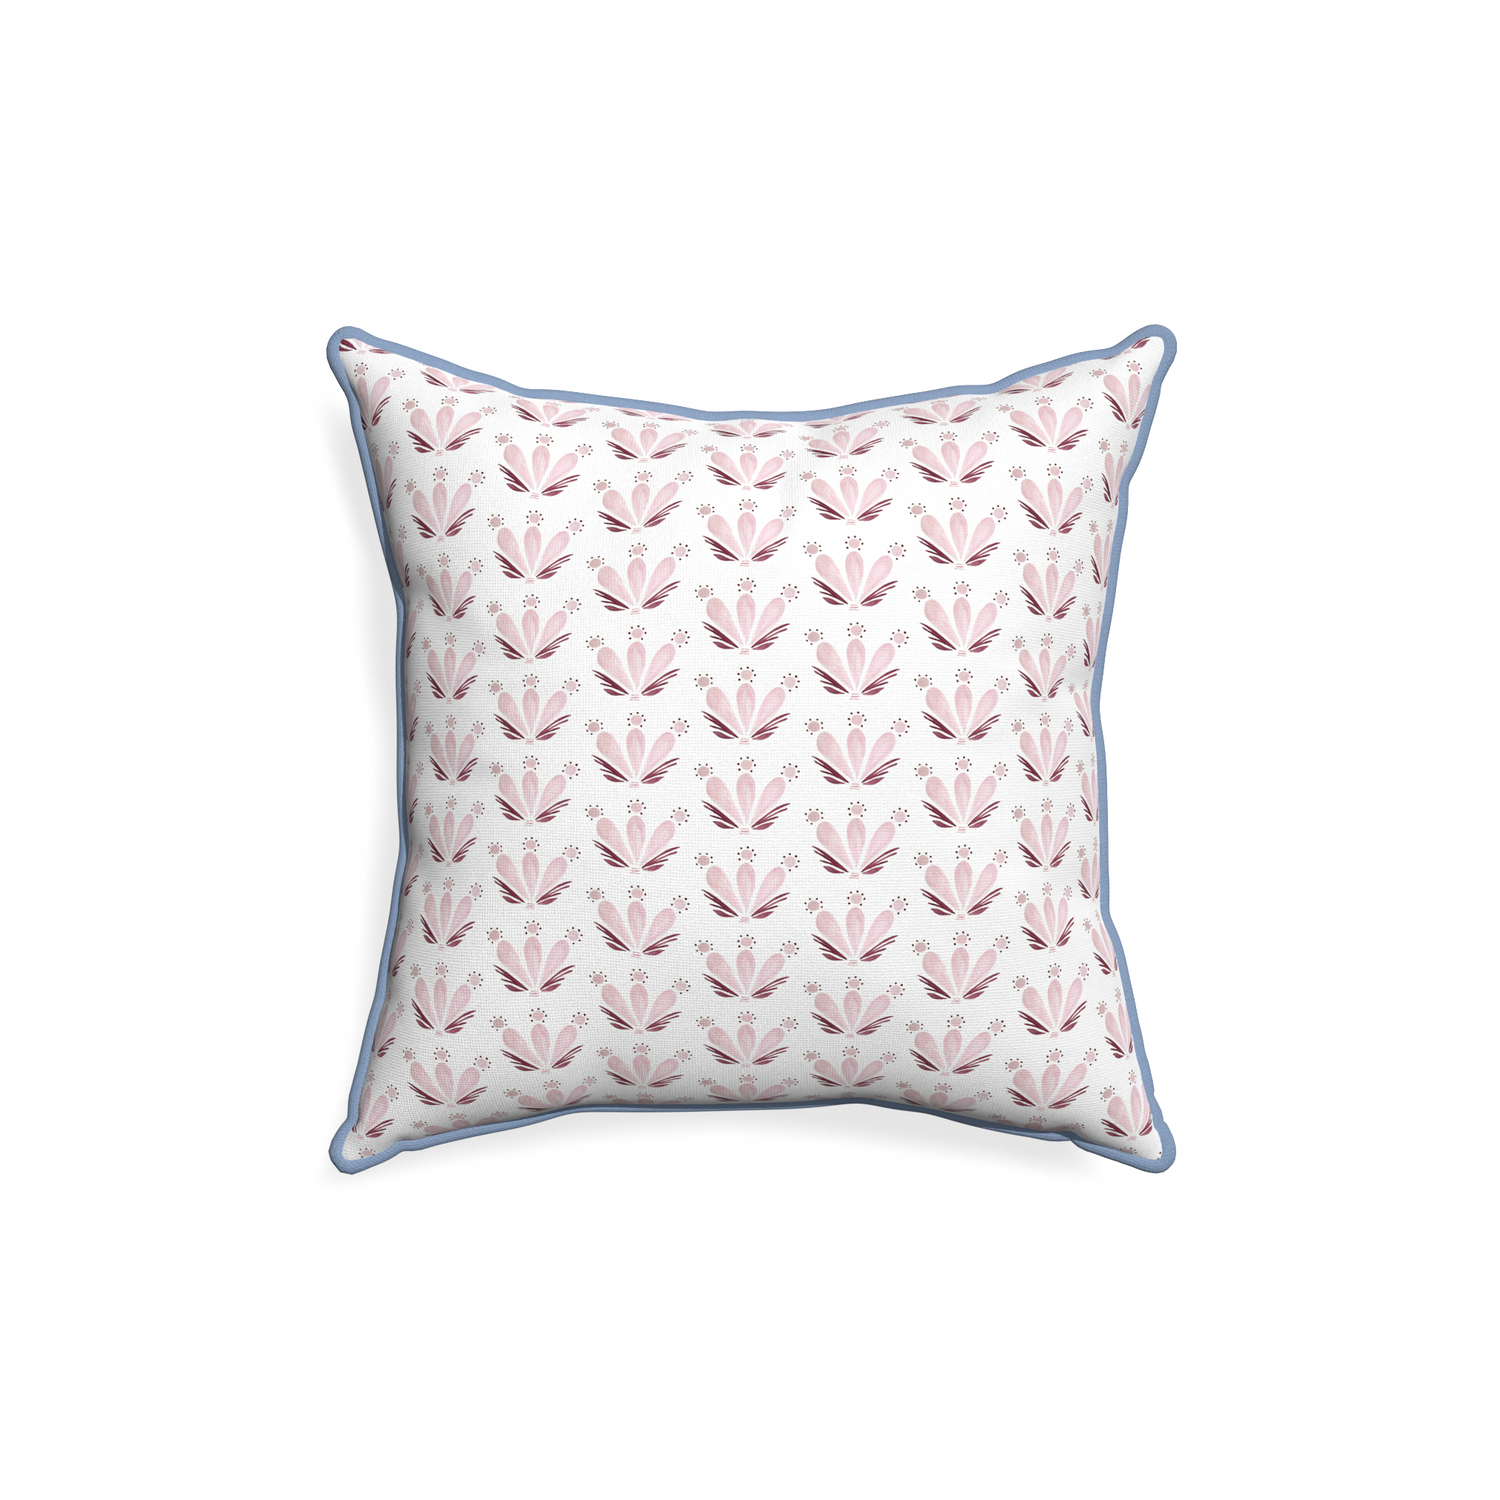 18-square serena pink custom pillow with sky piping on white background